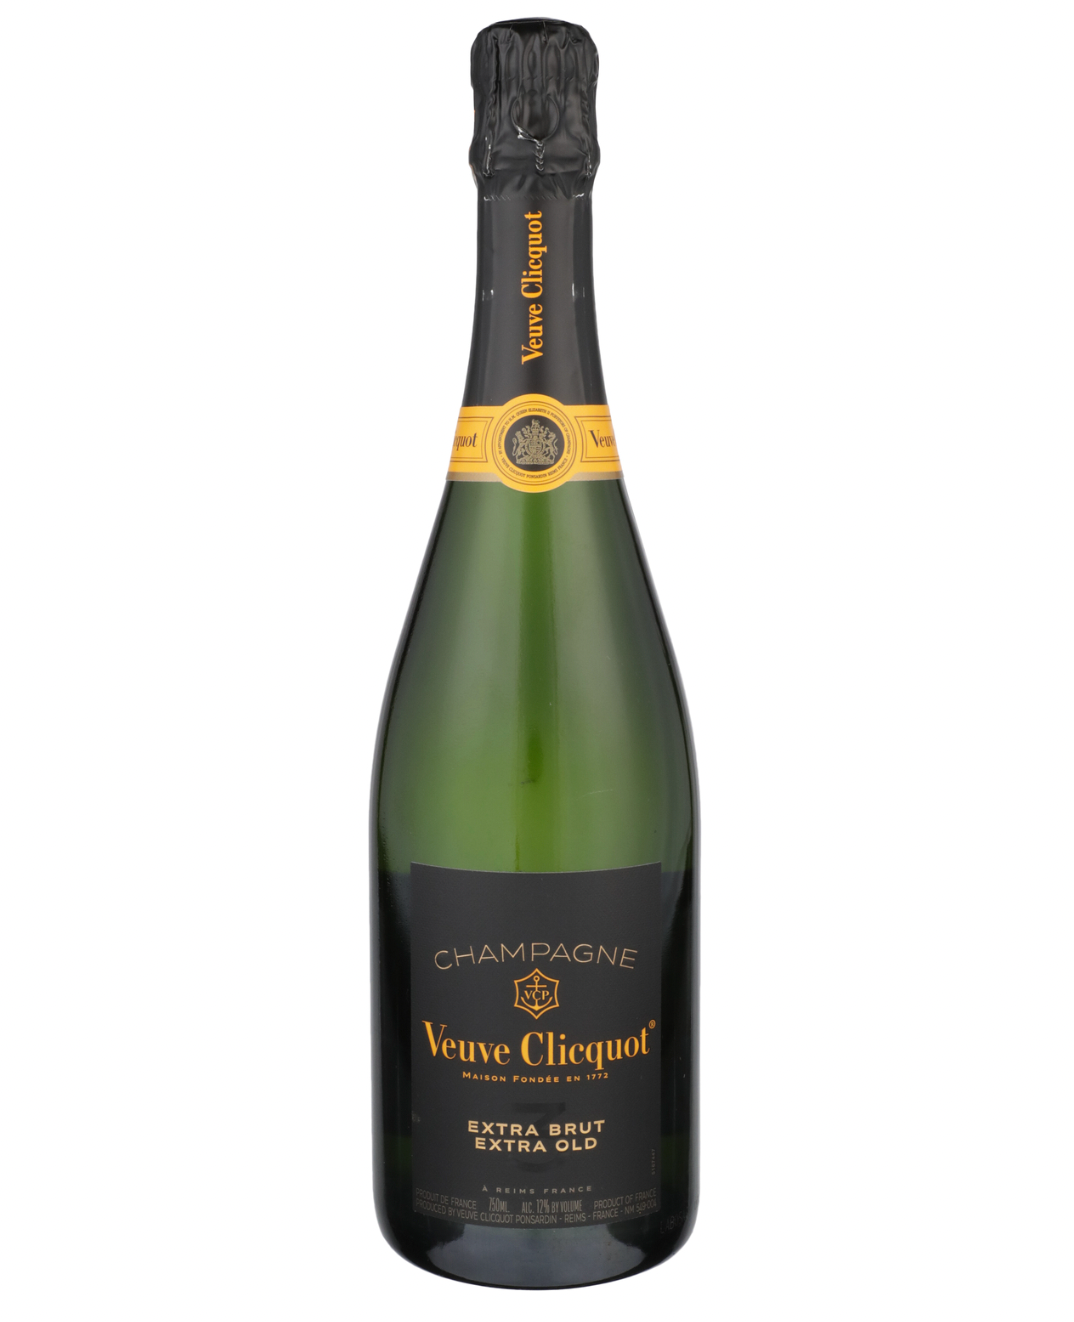 Veuve Clicquot Extra Old 3 Extra Brut Champagne 750ml